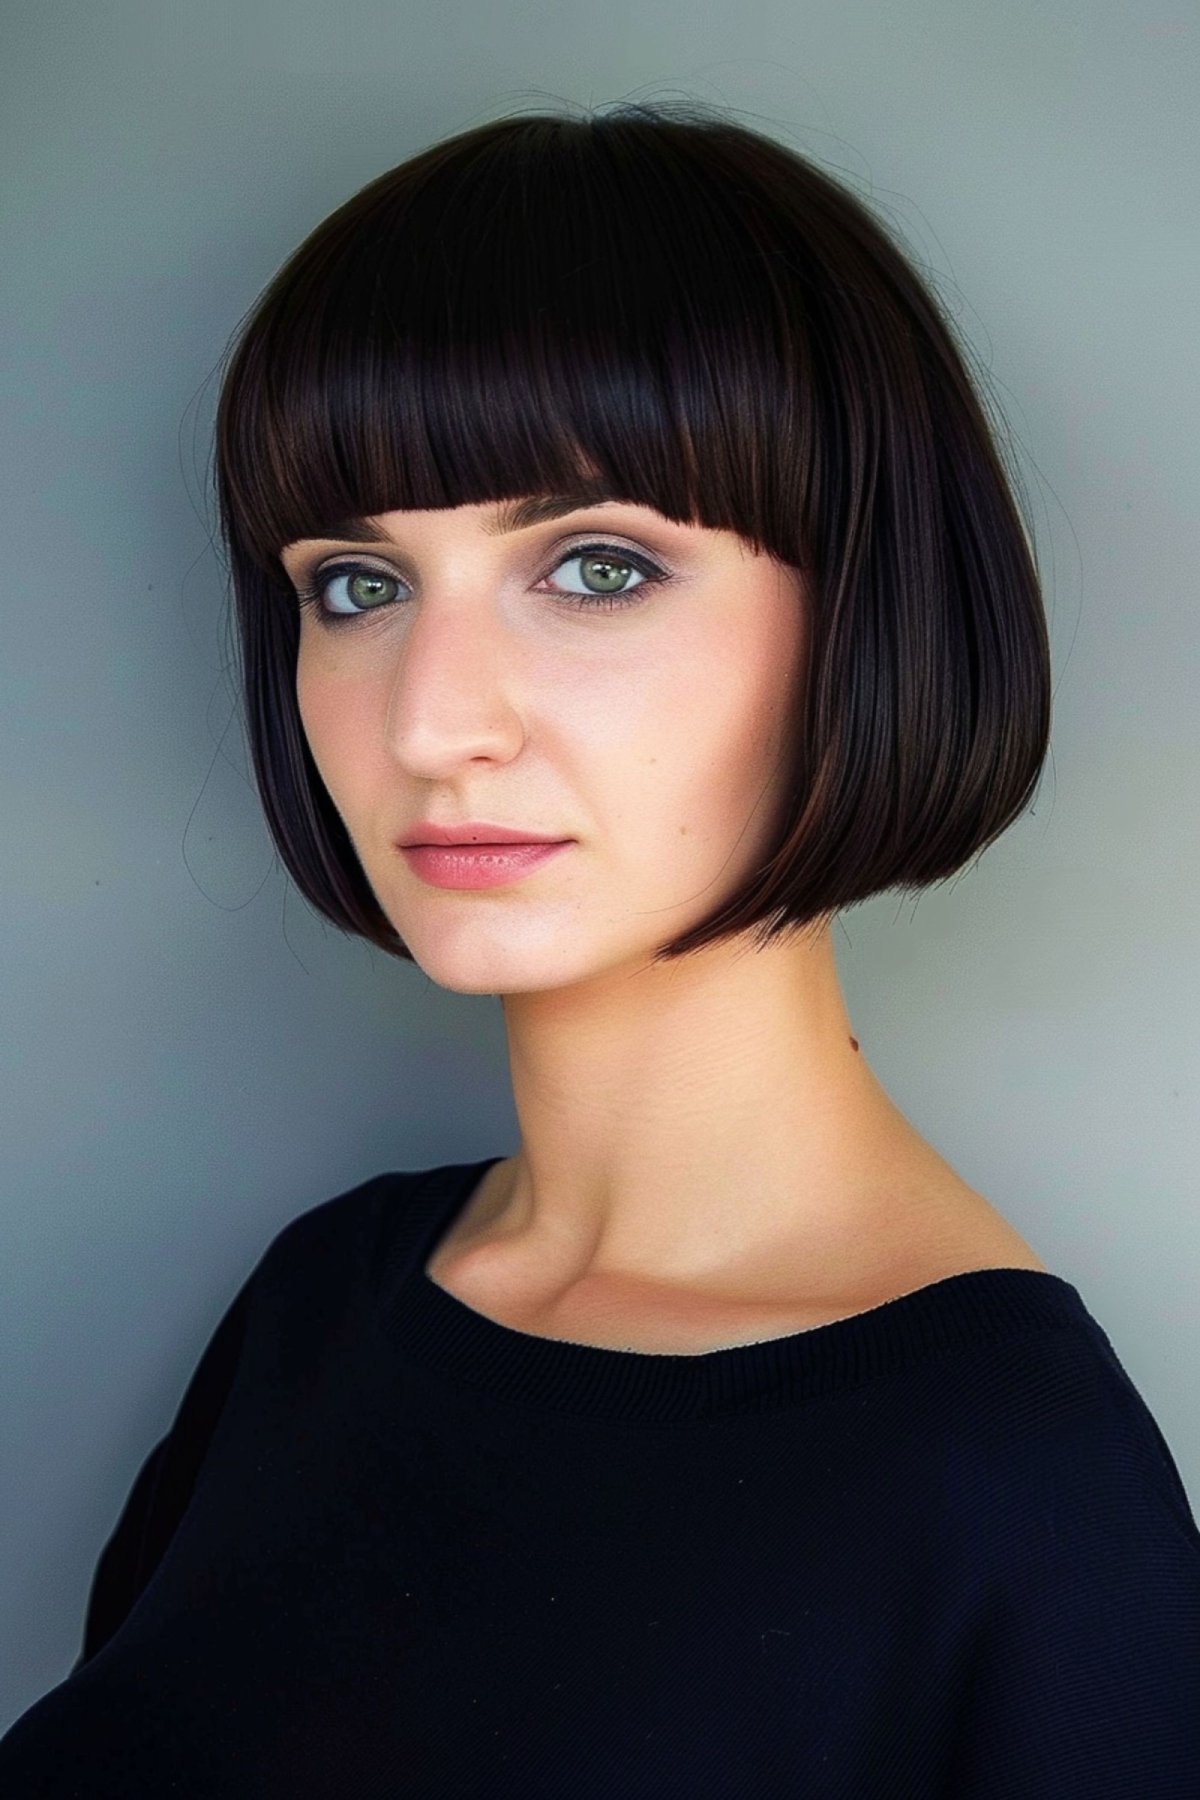 Woman with a chic pageboy haircut and blunt bangs